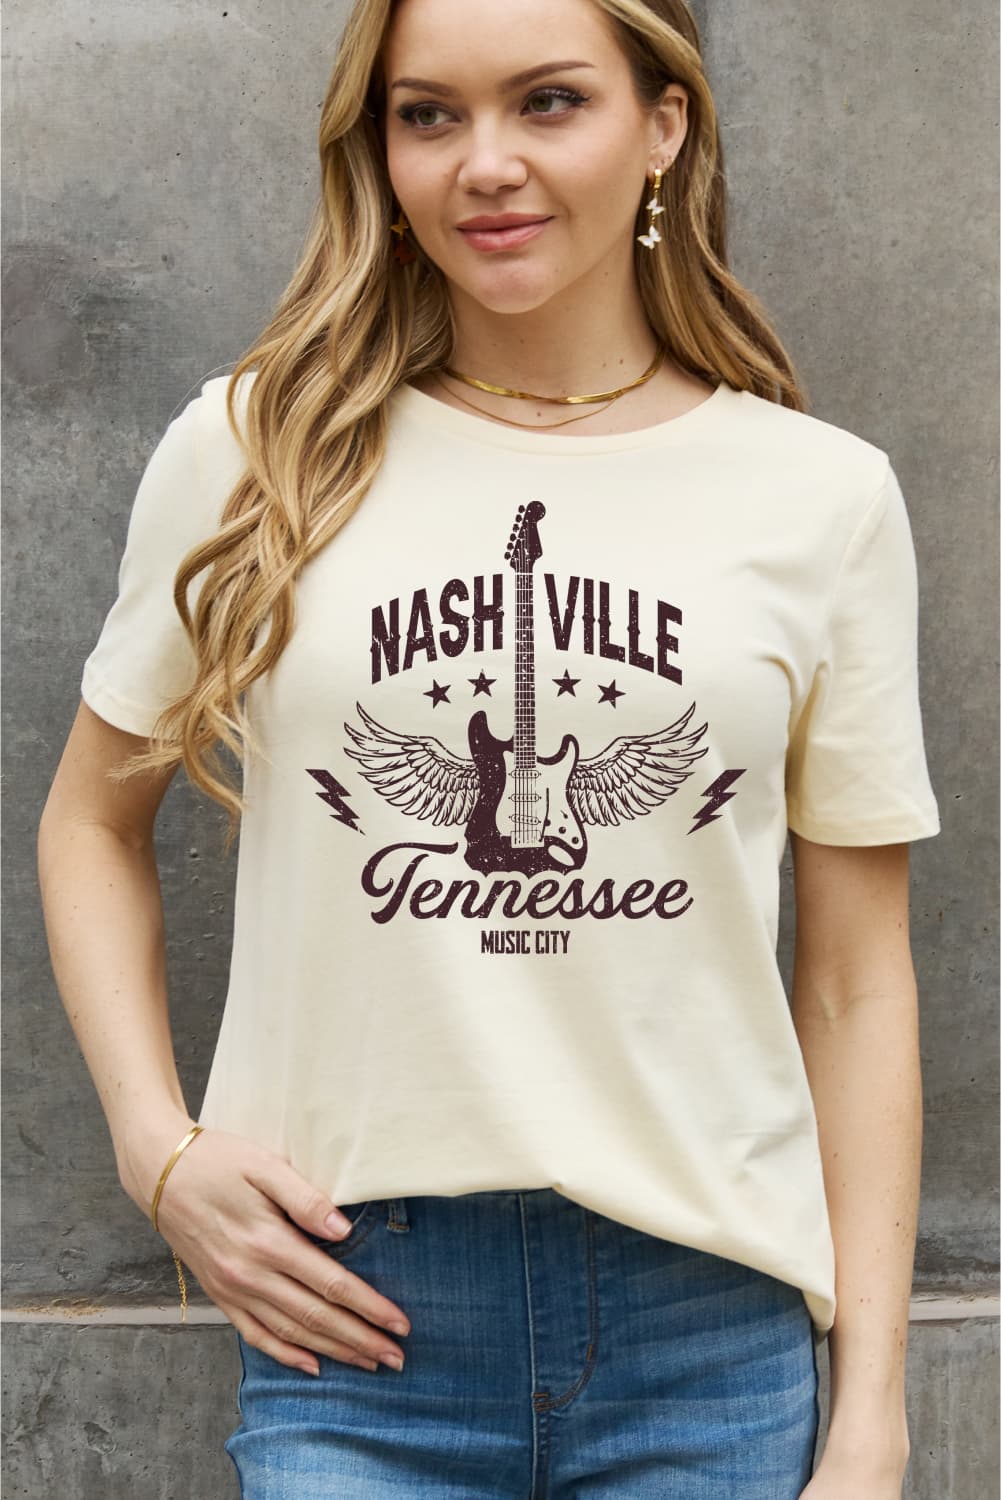 Simply Love Full Size NASHVILLE TENNESSEE MUSIC CITY Graphic Cotton Tee BLUE ZONE PLANET